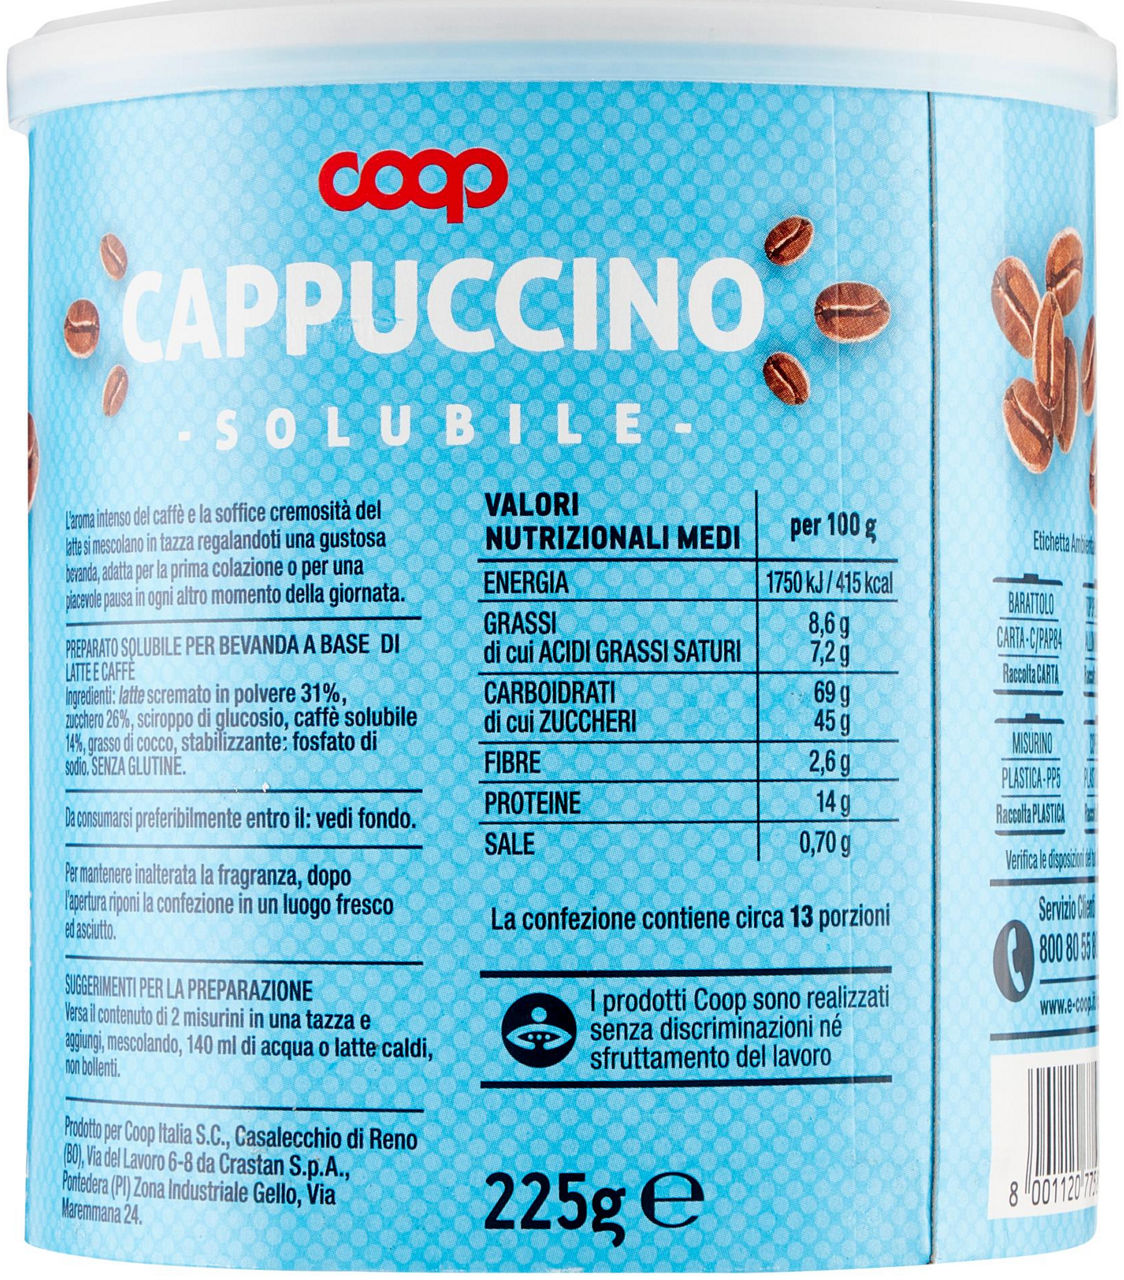 CAPPUCCINO SOLUBILE COOP225G - 2